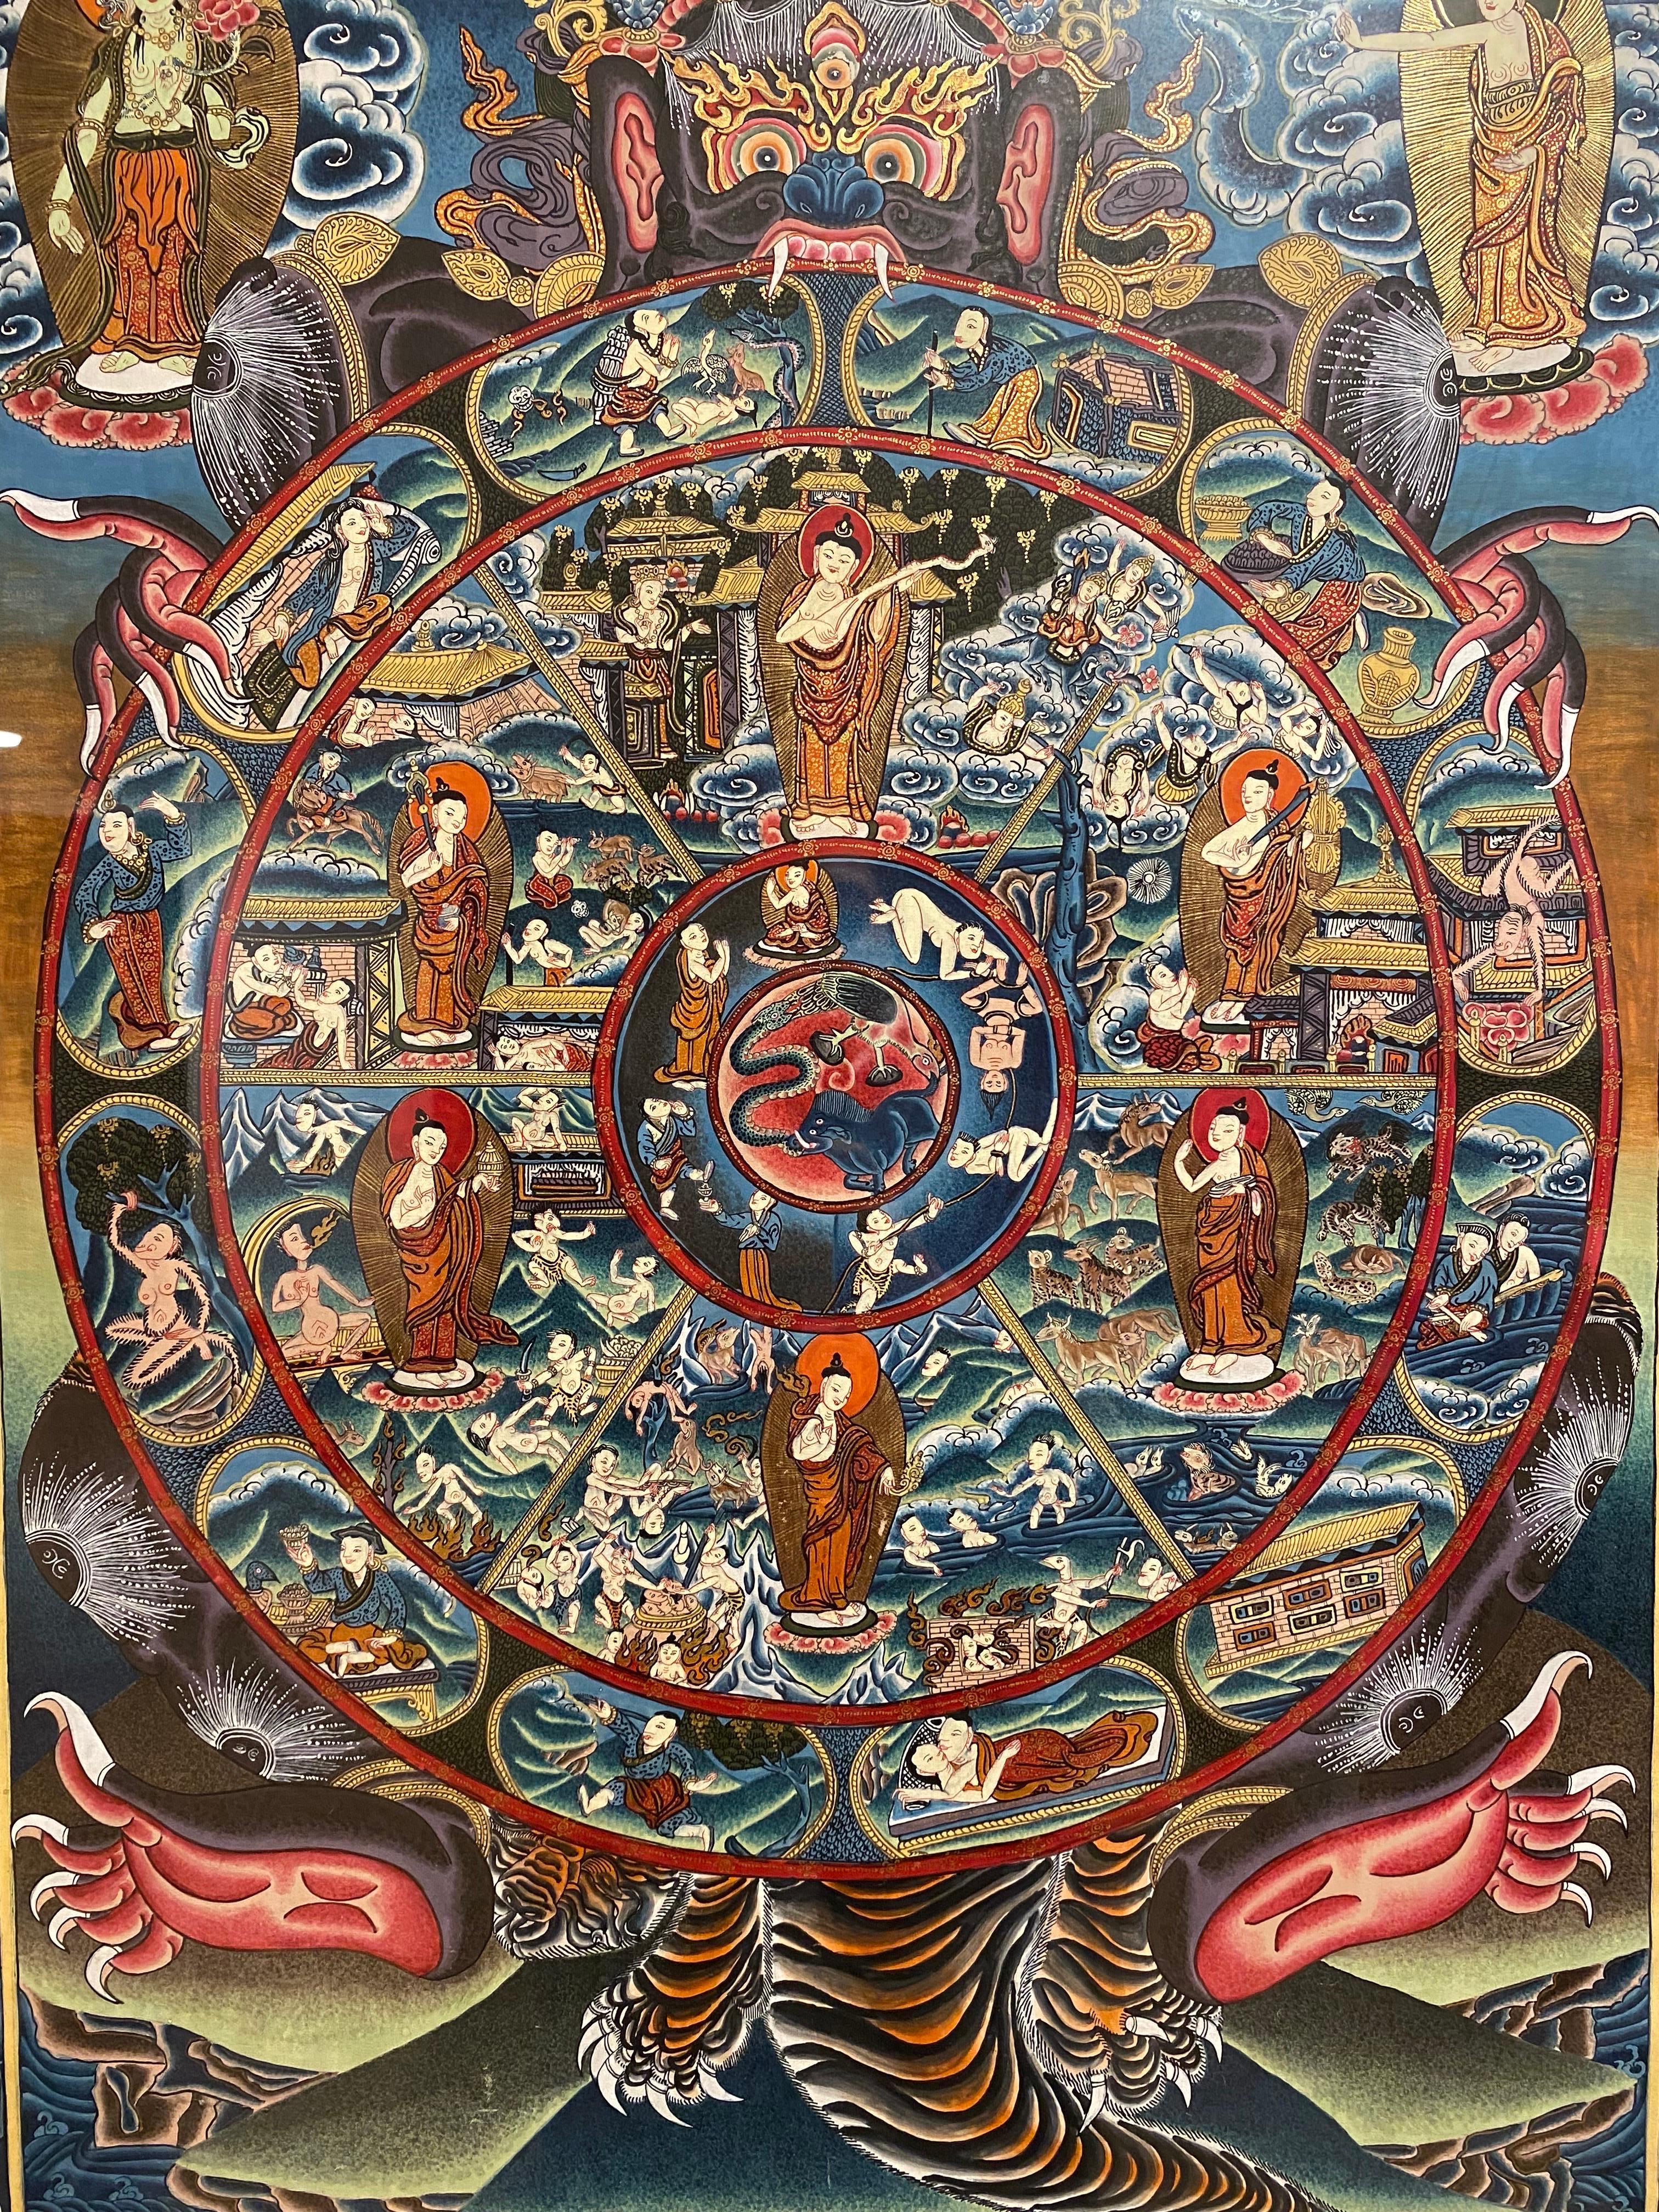 Framed Hand Painted on Canvas Wheel of Life Thangka 24K Gold - Other Art Style Painting by Unknown